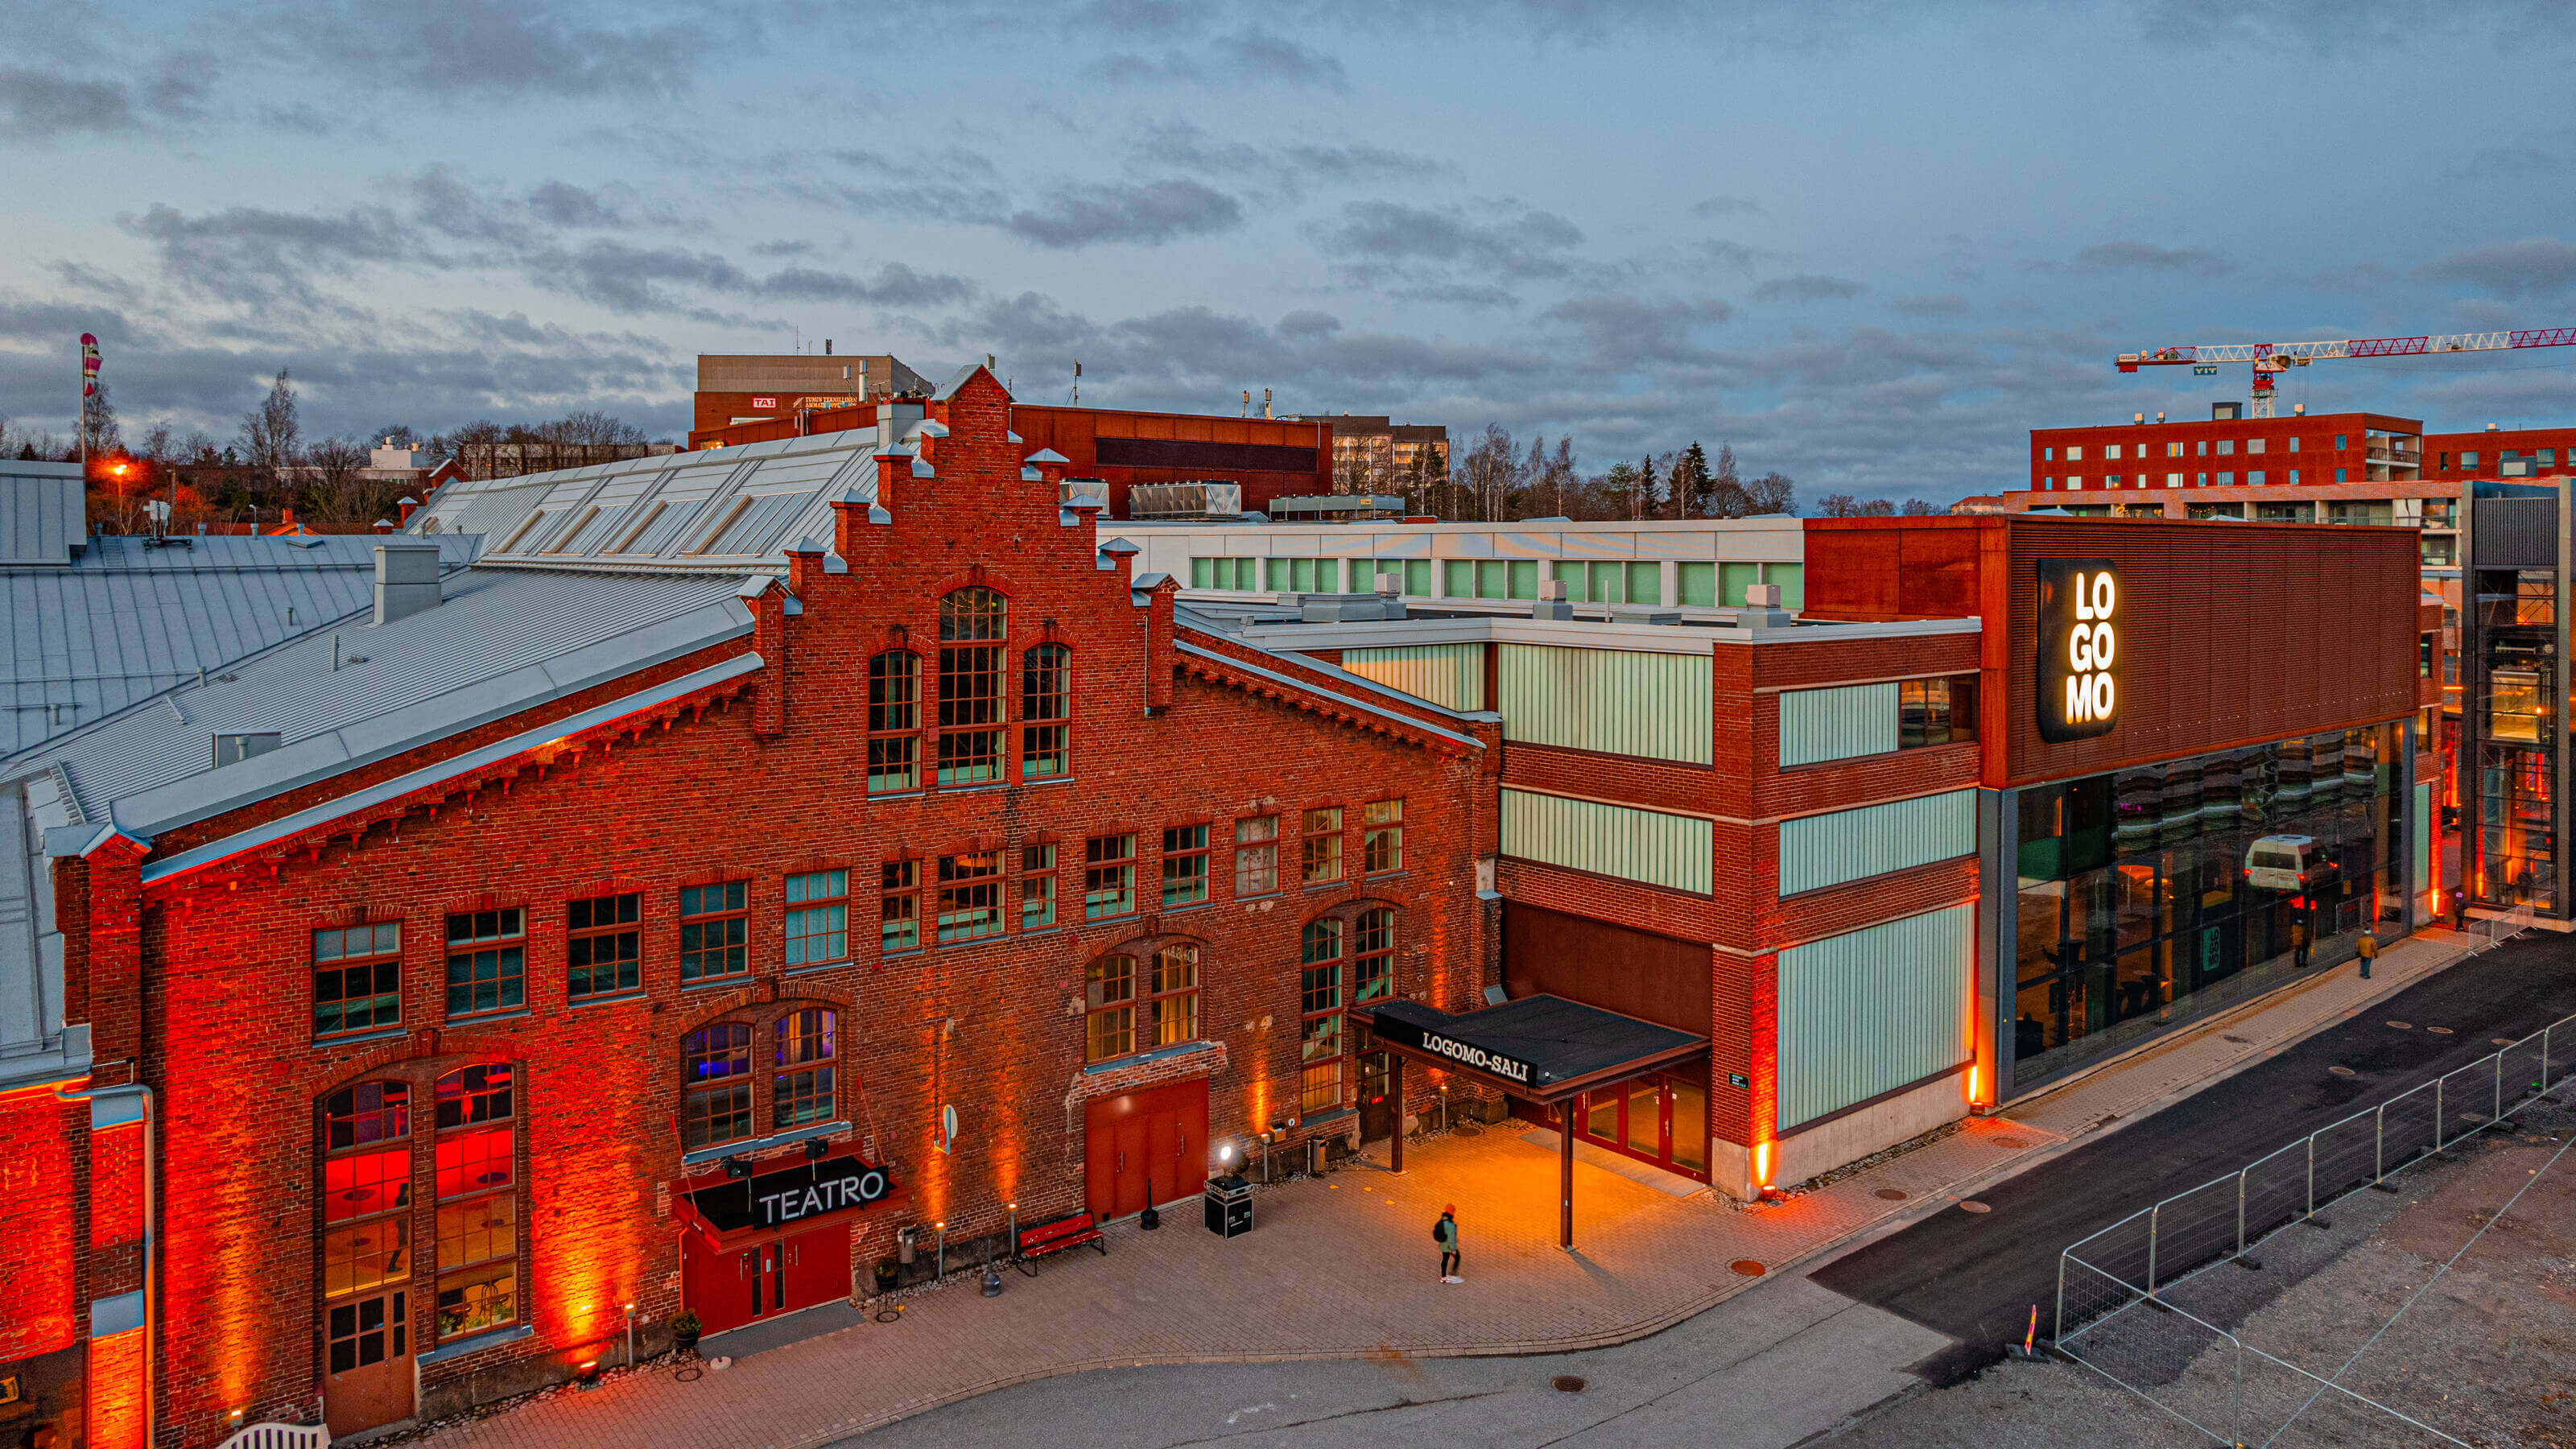 A red-brick defunct locomotive workshop transformed into a centre for culture, arts and creative economy.